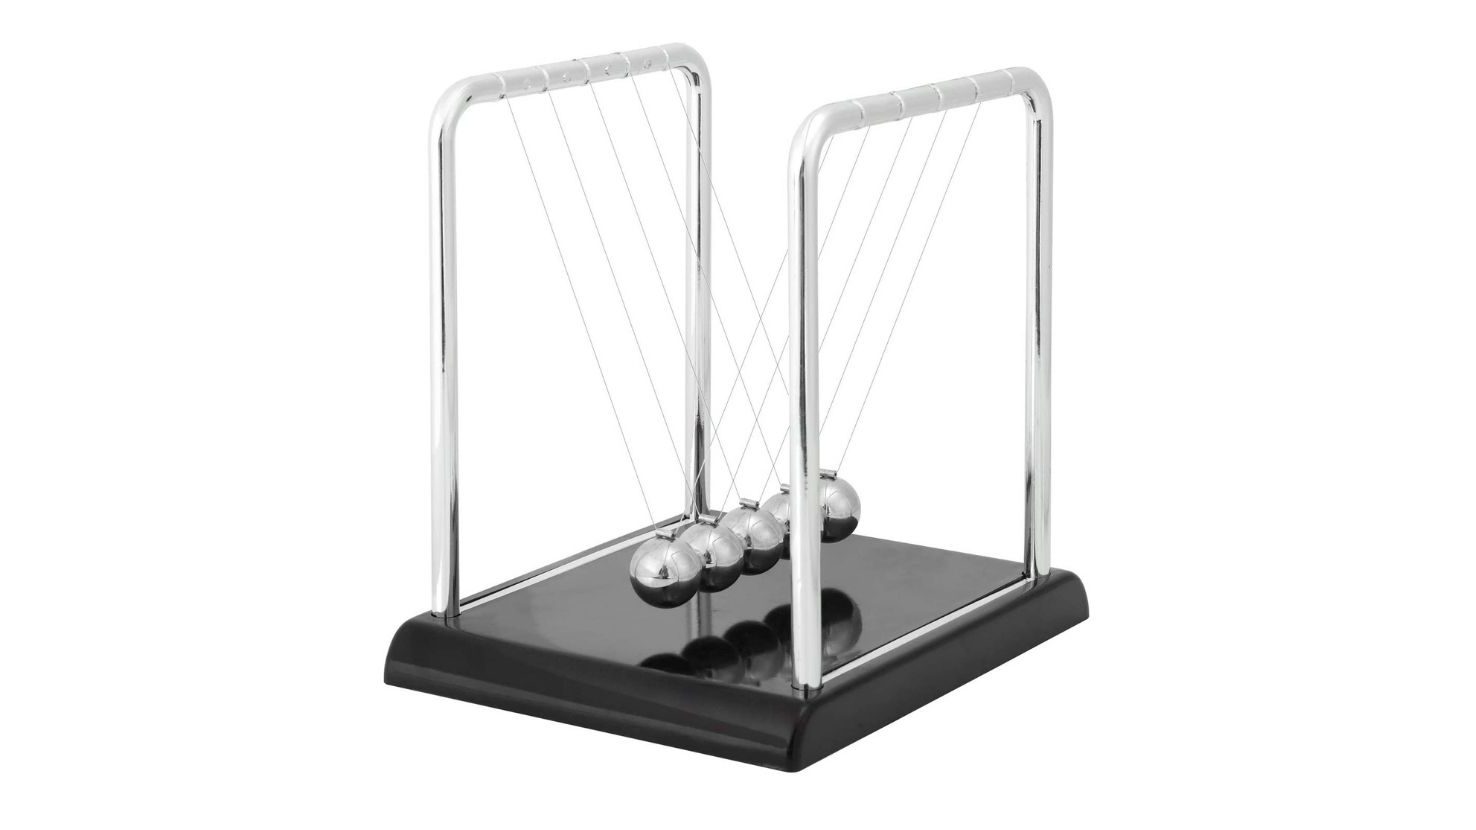 Newton's Cradle is a stylish home office desk gadget that'll make your desk look more inviting